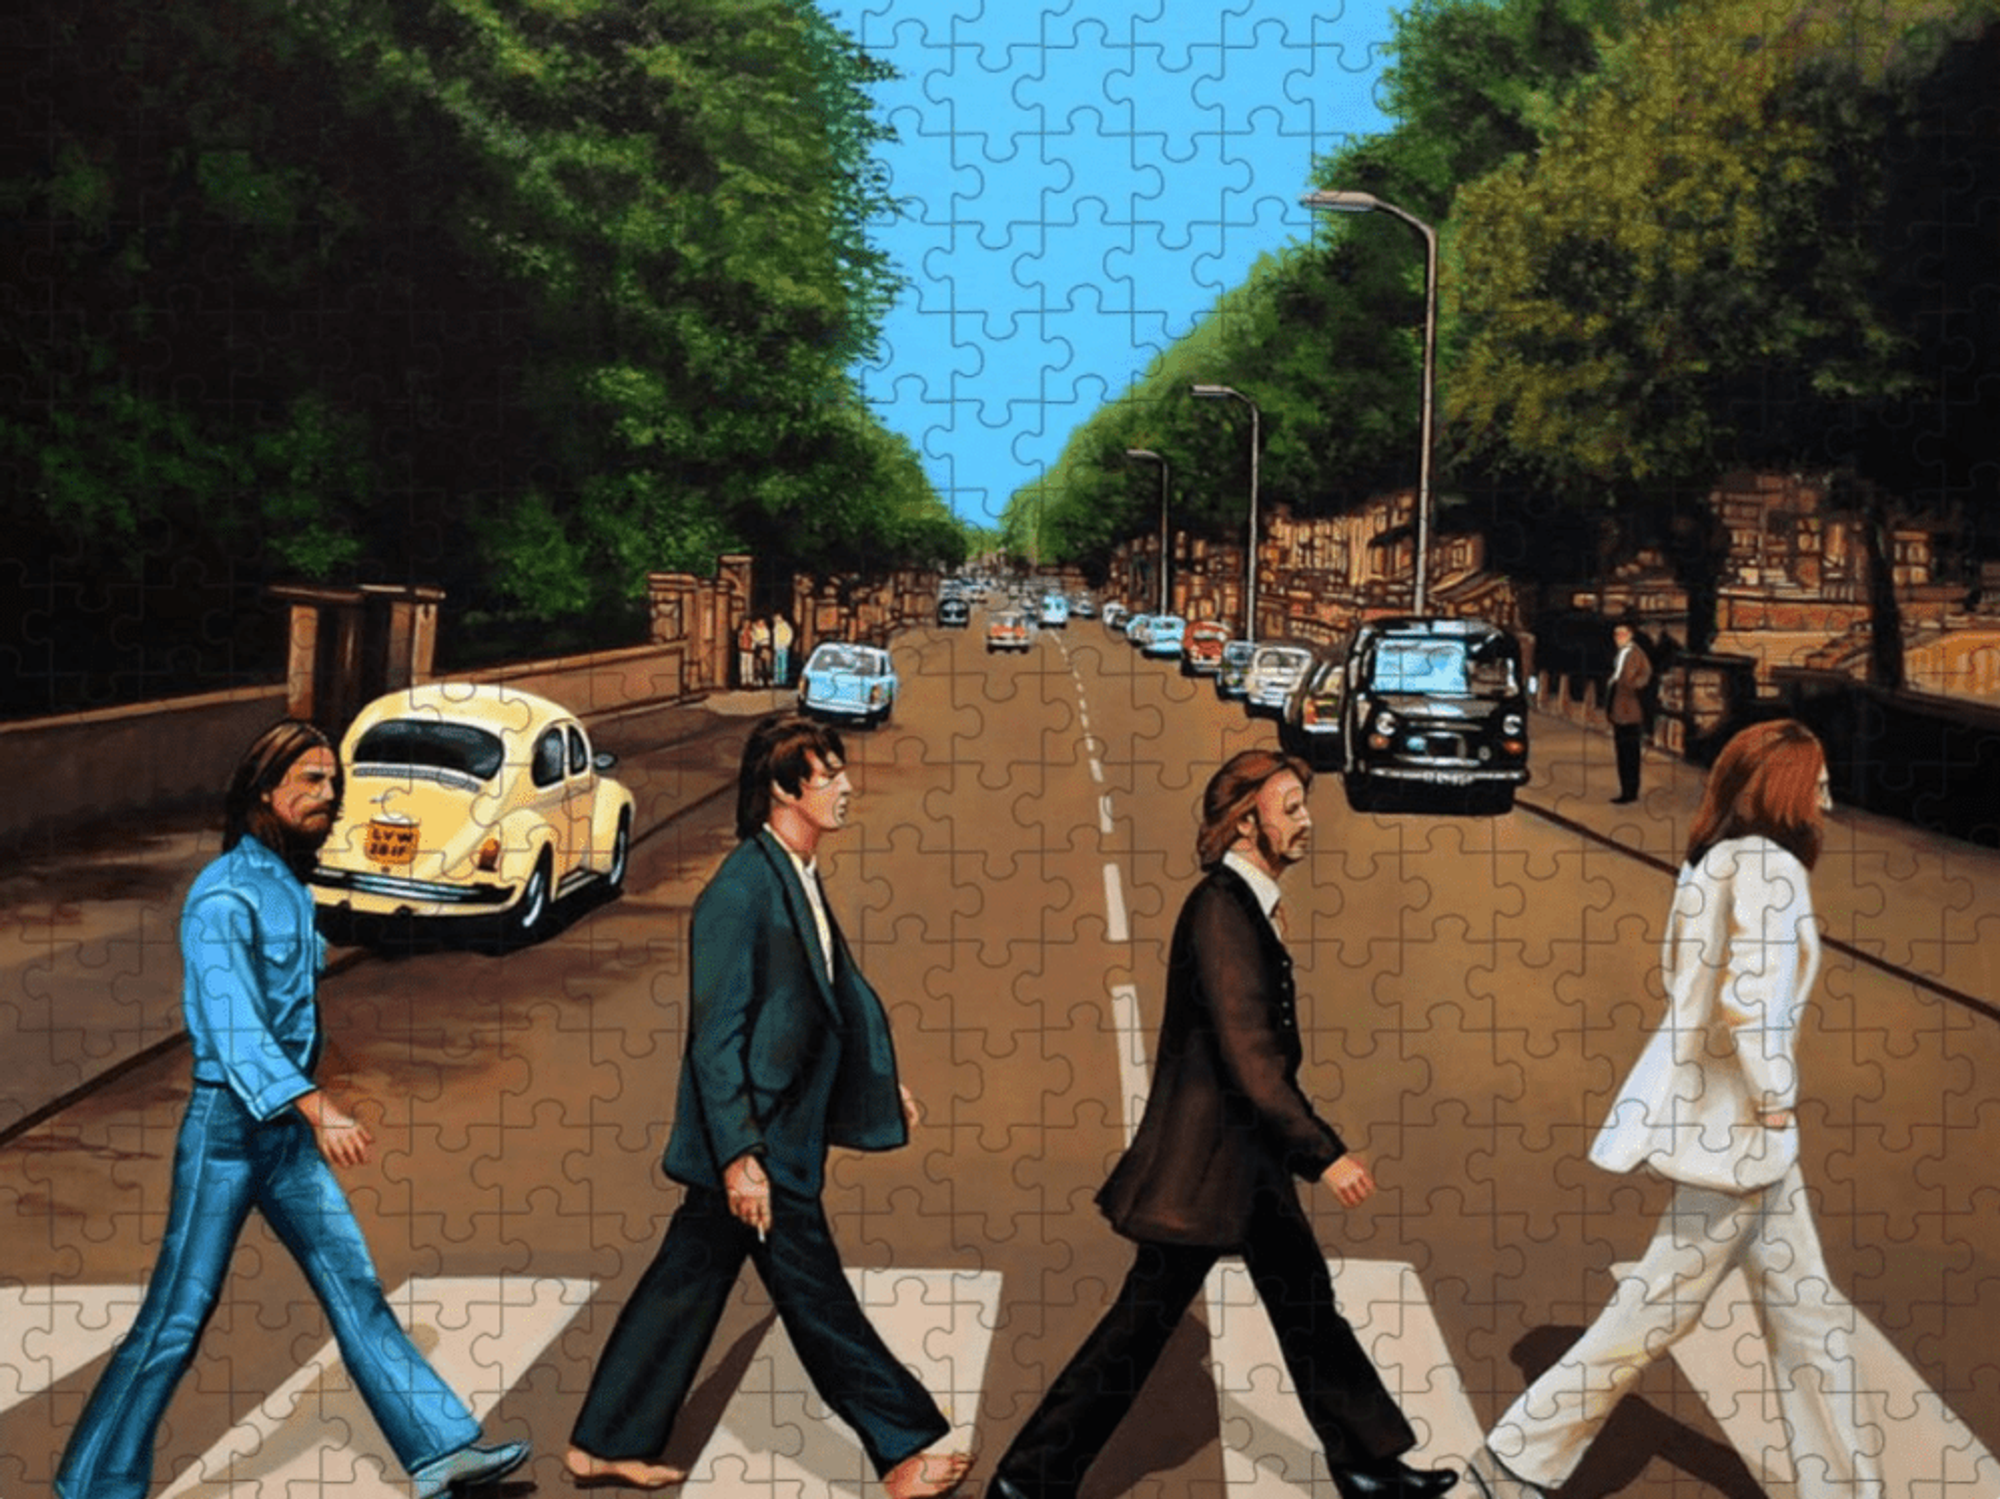 The Beatles puzzle by Paul Meijering